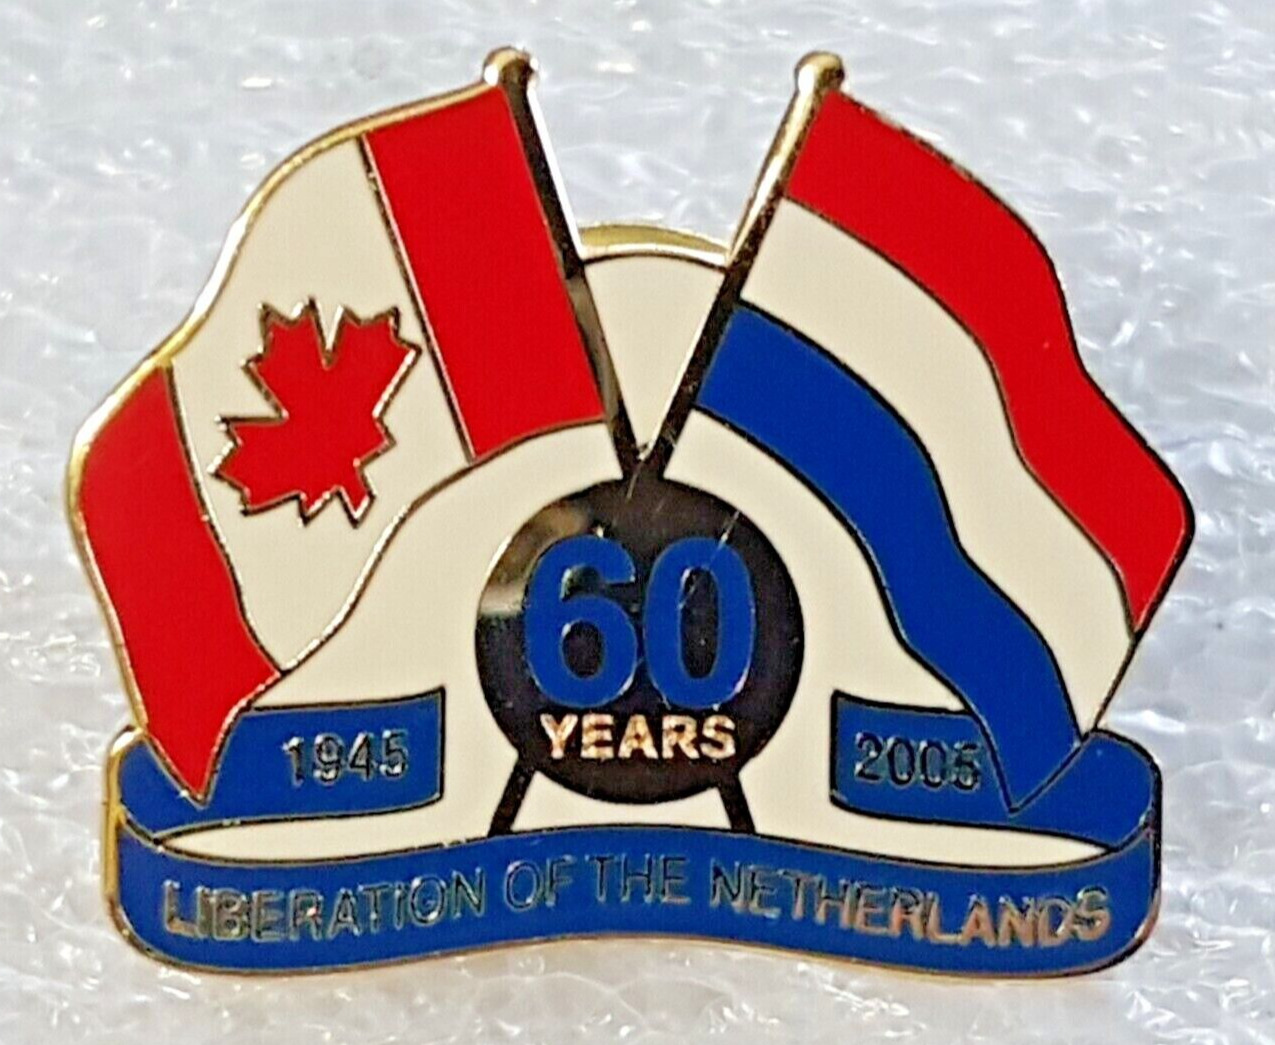 VINTAGE LIBERATION OF THE NETHERLANDS PIN 60 YEARS 1945-2005 METAL COLLECTIBLE